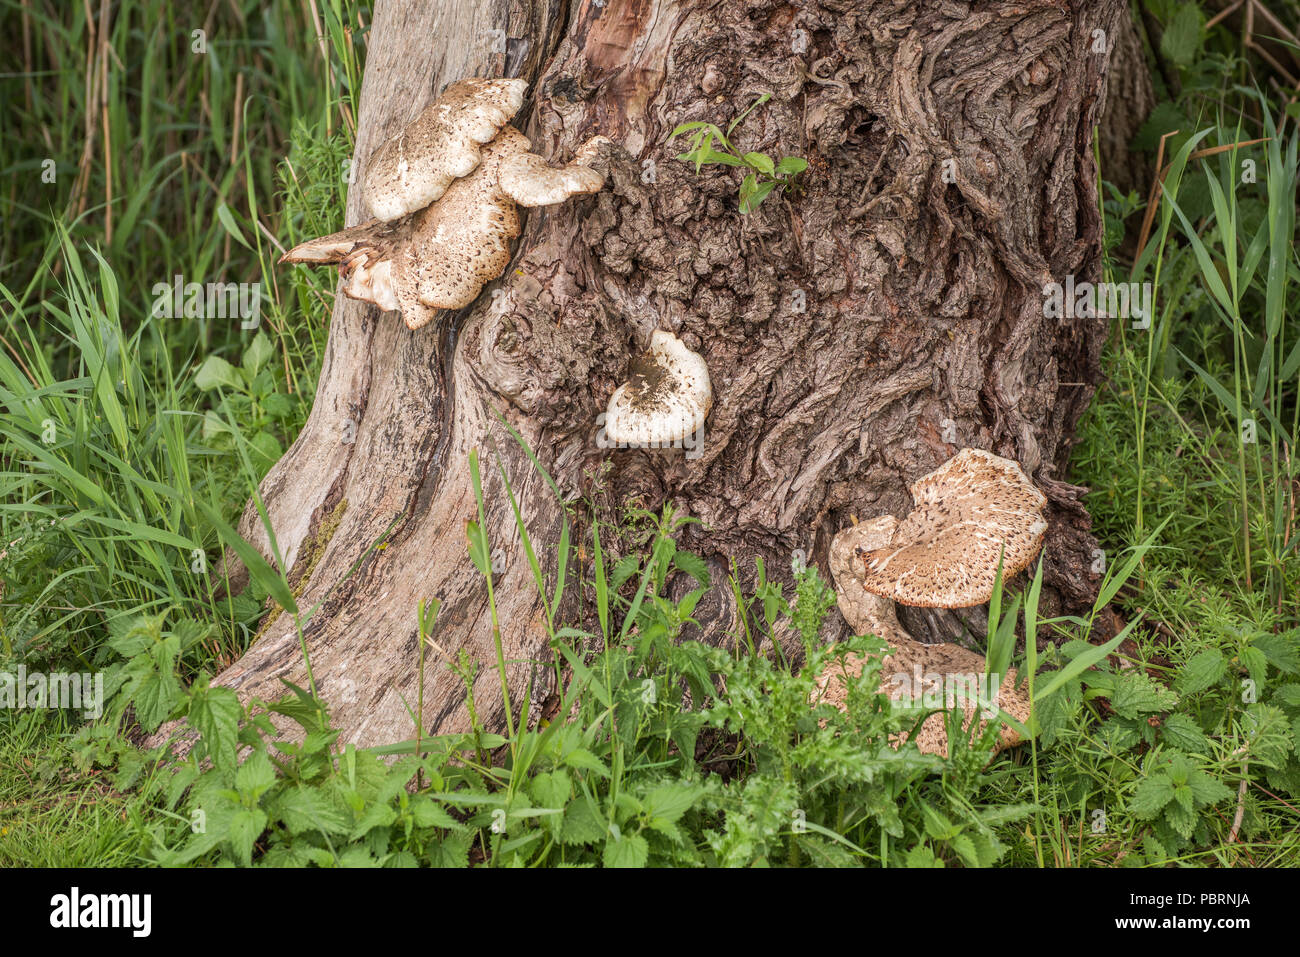 Wild mushrooms are growing in a forest at the foot of a tree trunk. Stock Photo